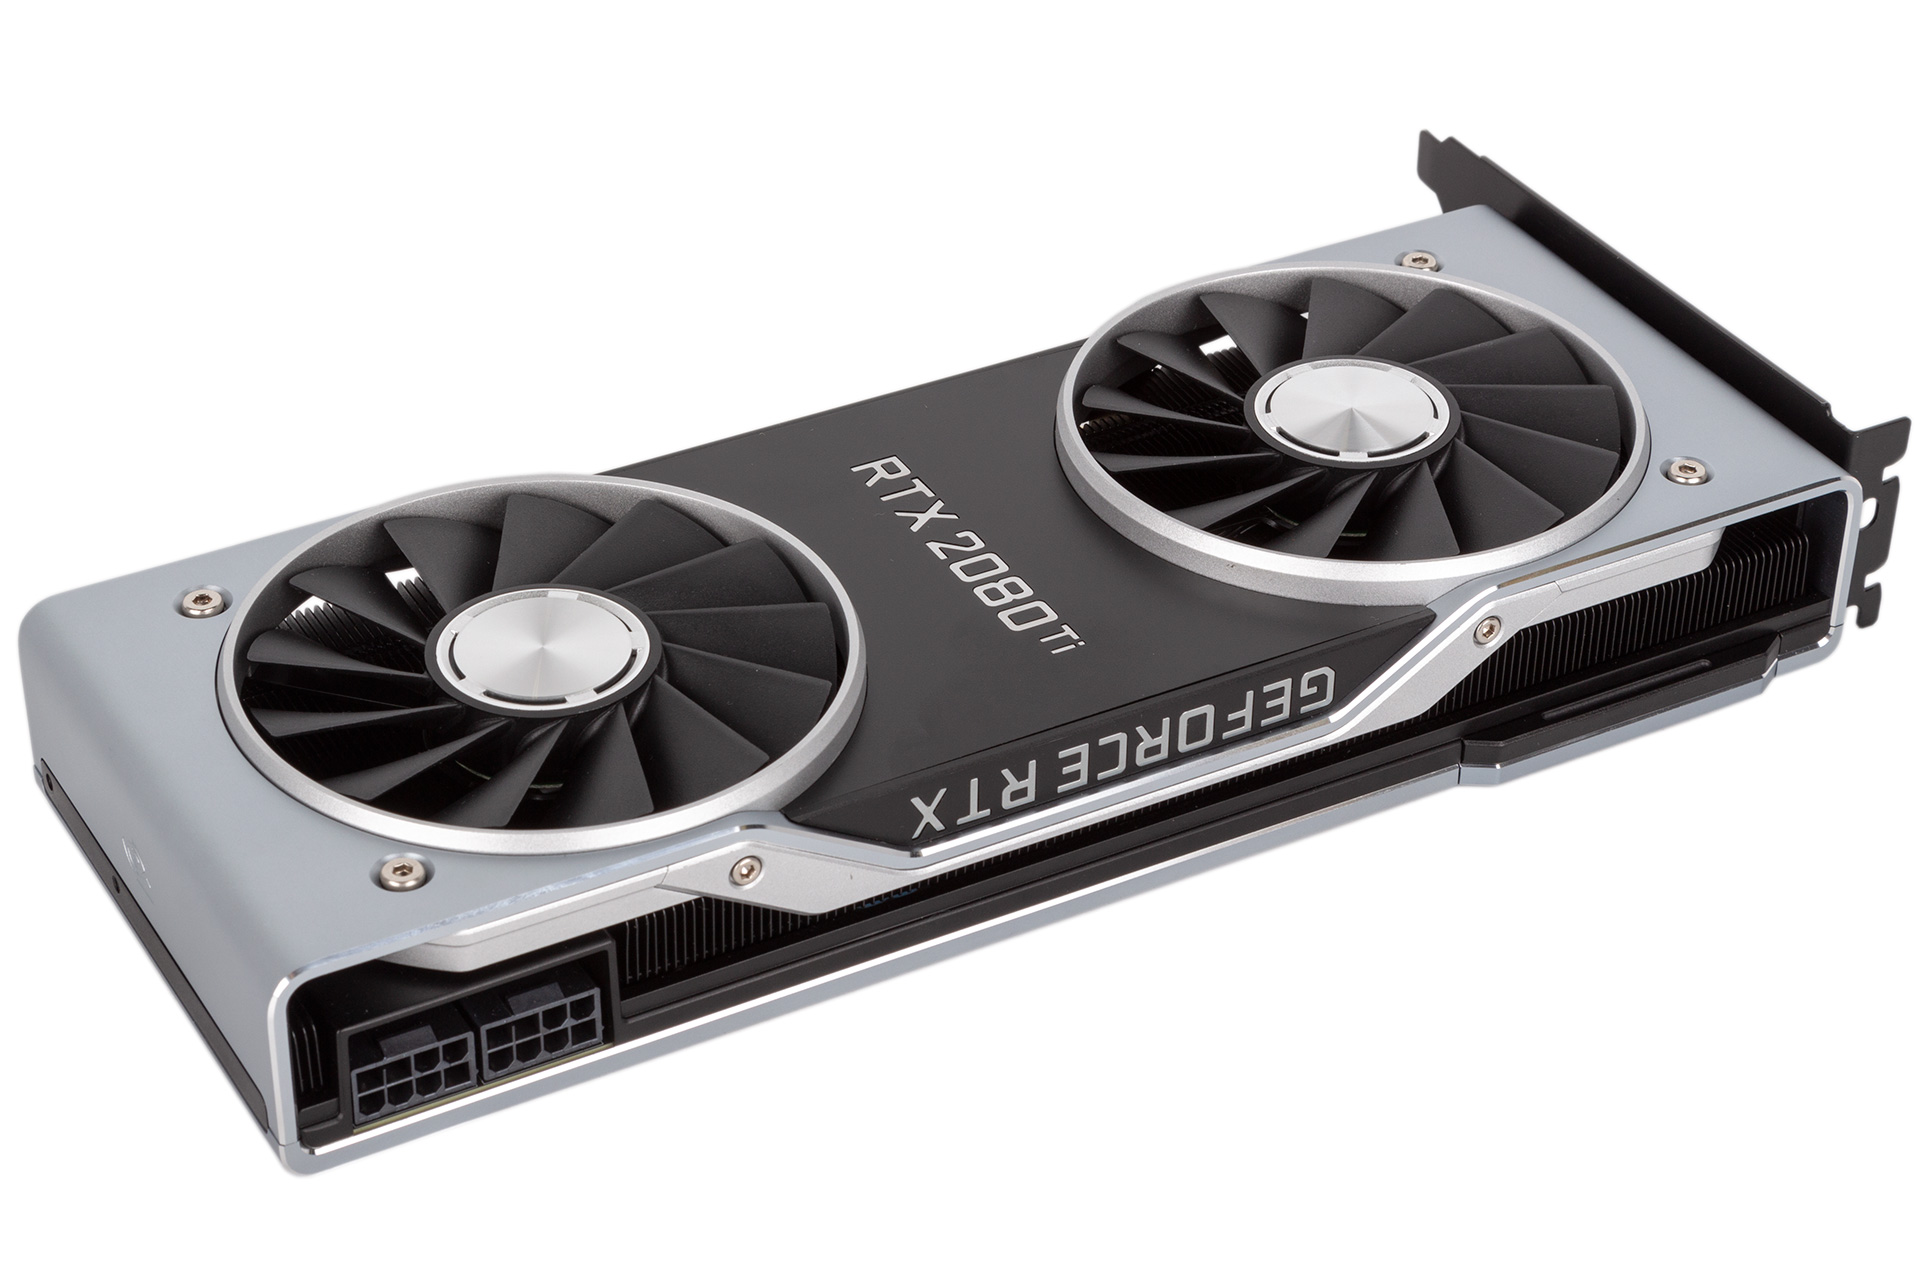 Nvidia GeForce RTX 2080 Ti and RTX 2080 Founders Edition Reviews | bit-tech.net